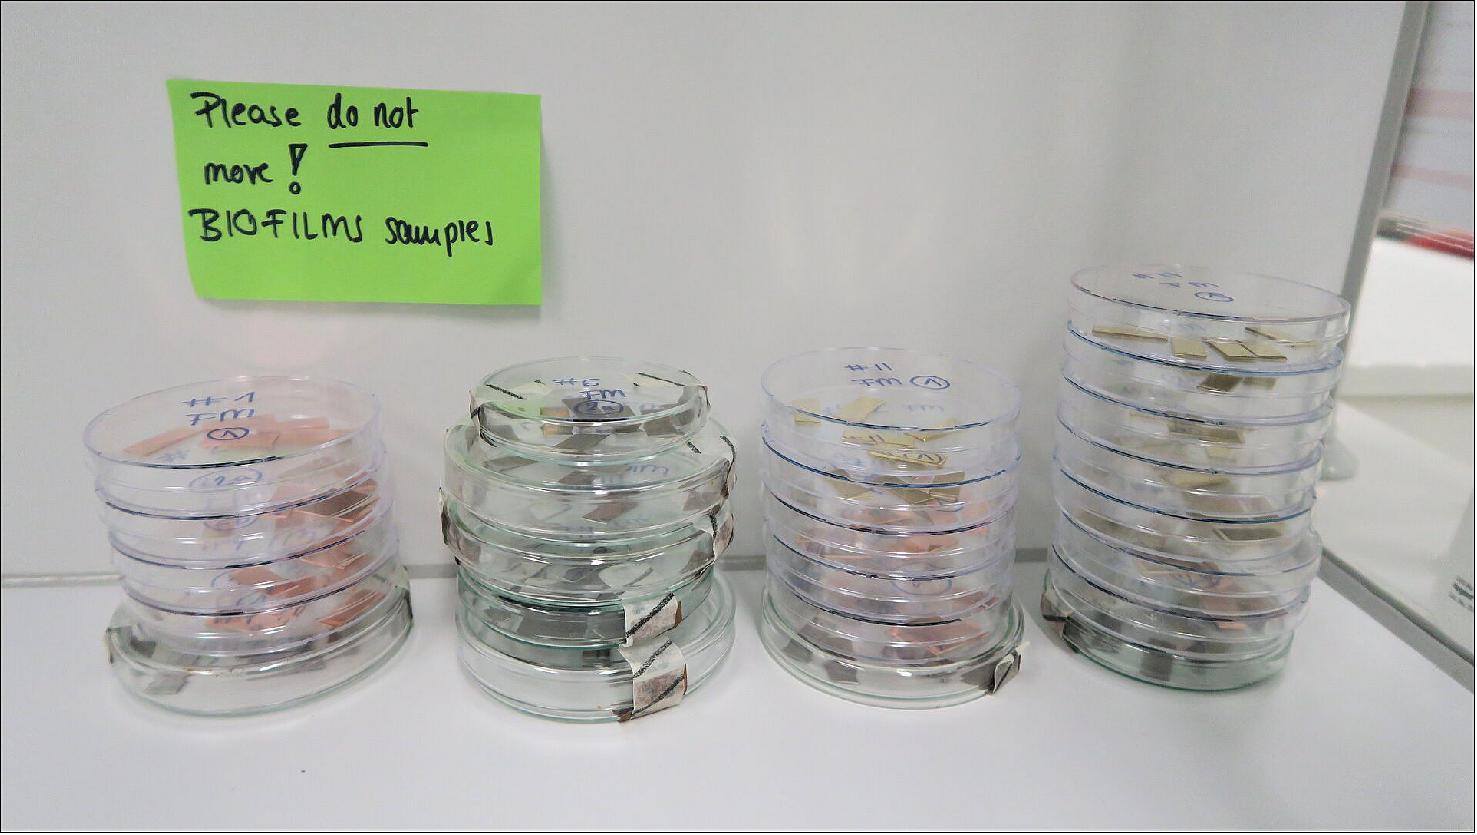 Figure 9: Samples of the Biofilms experiment are headed to the ISS on the SpaceX CRS-23 resupply mission (image credit: DLR (CC-BY-NC-ND 3.0))